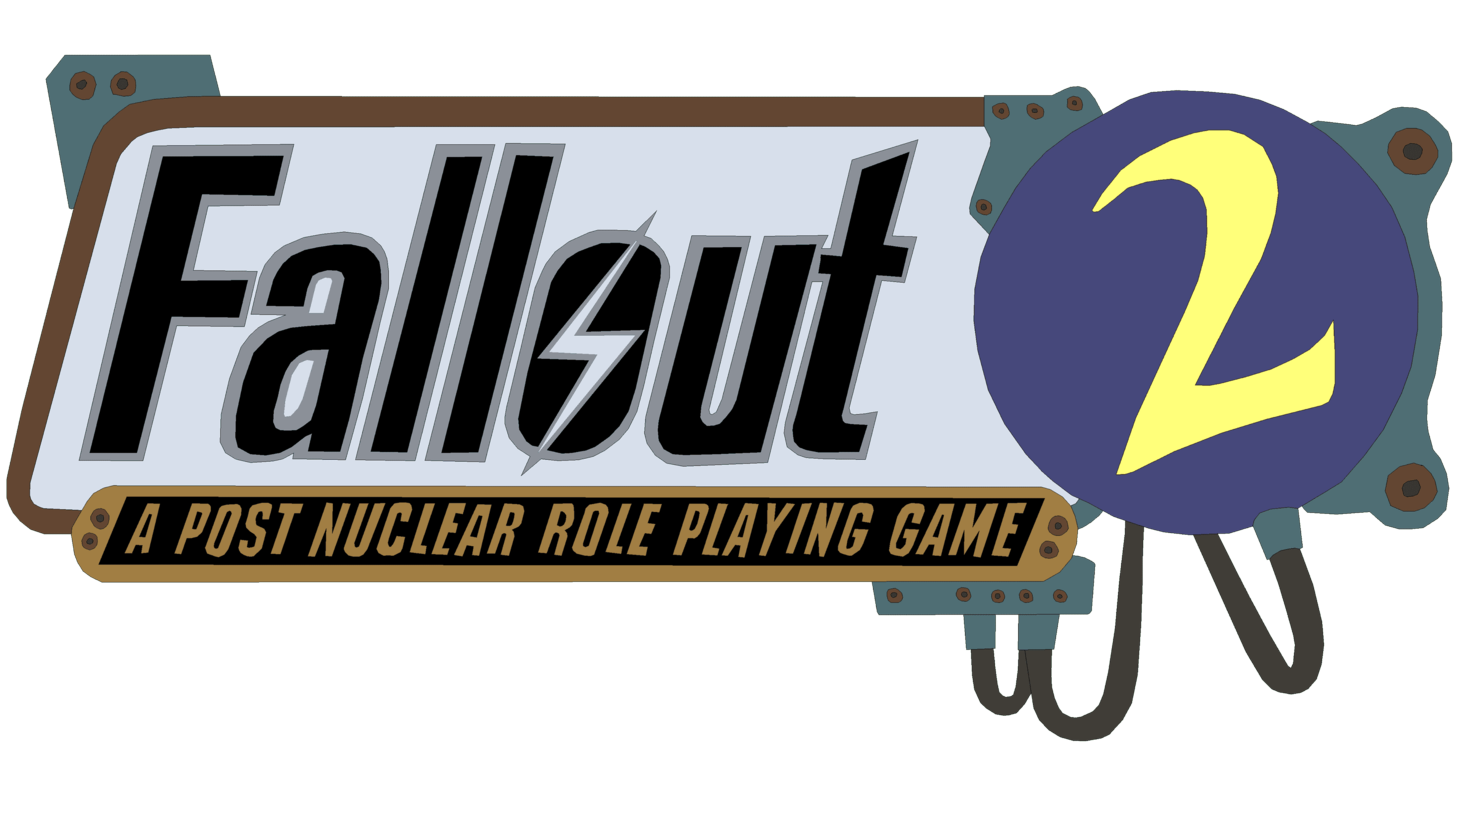 Fallout 2 sign 1998